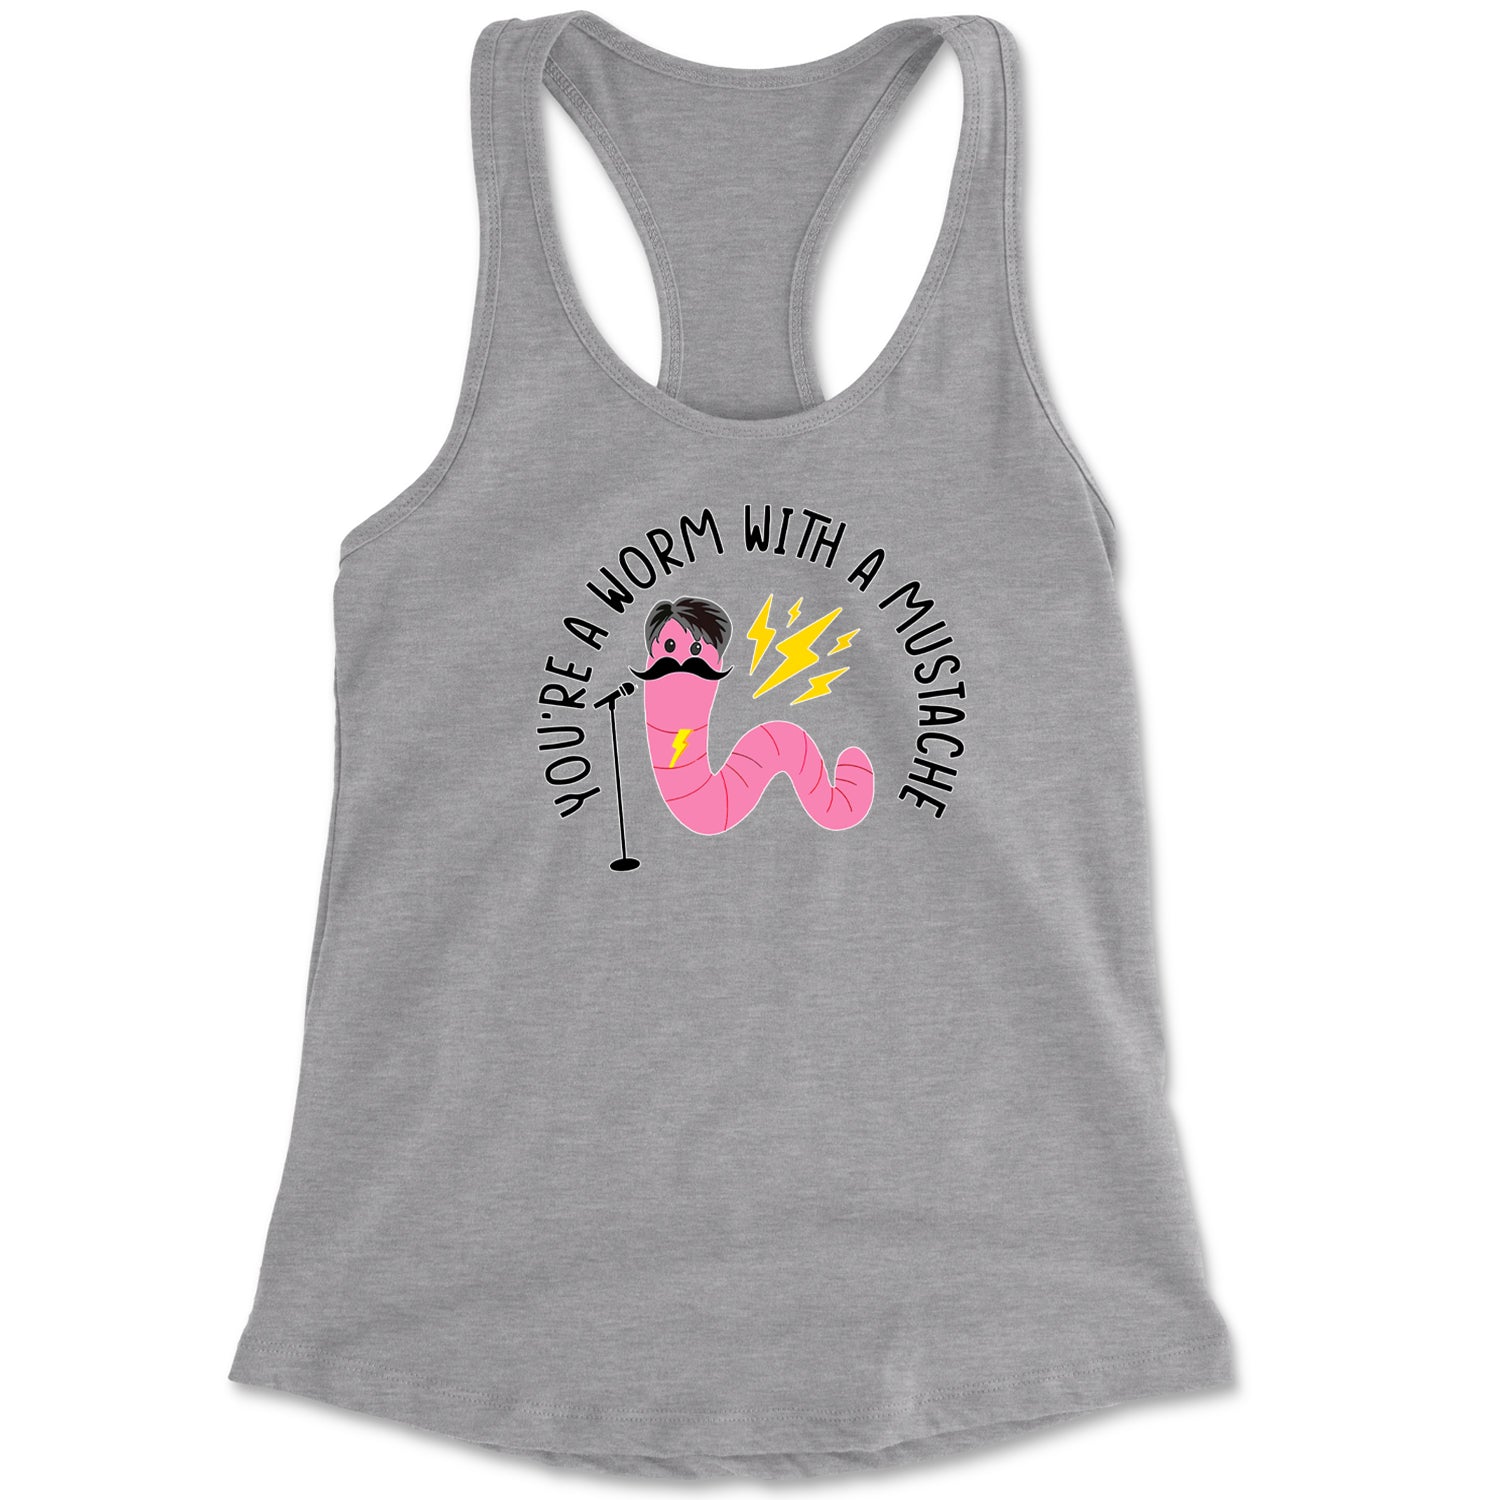 You're A Worm With A Mustache Tom Scandoval Racerback Tank Top for Women